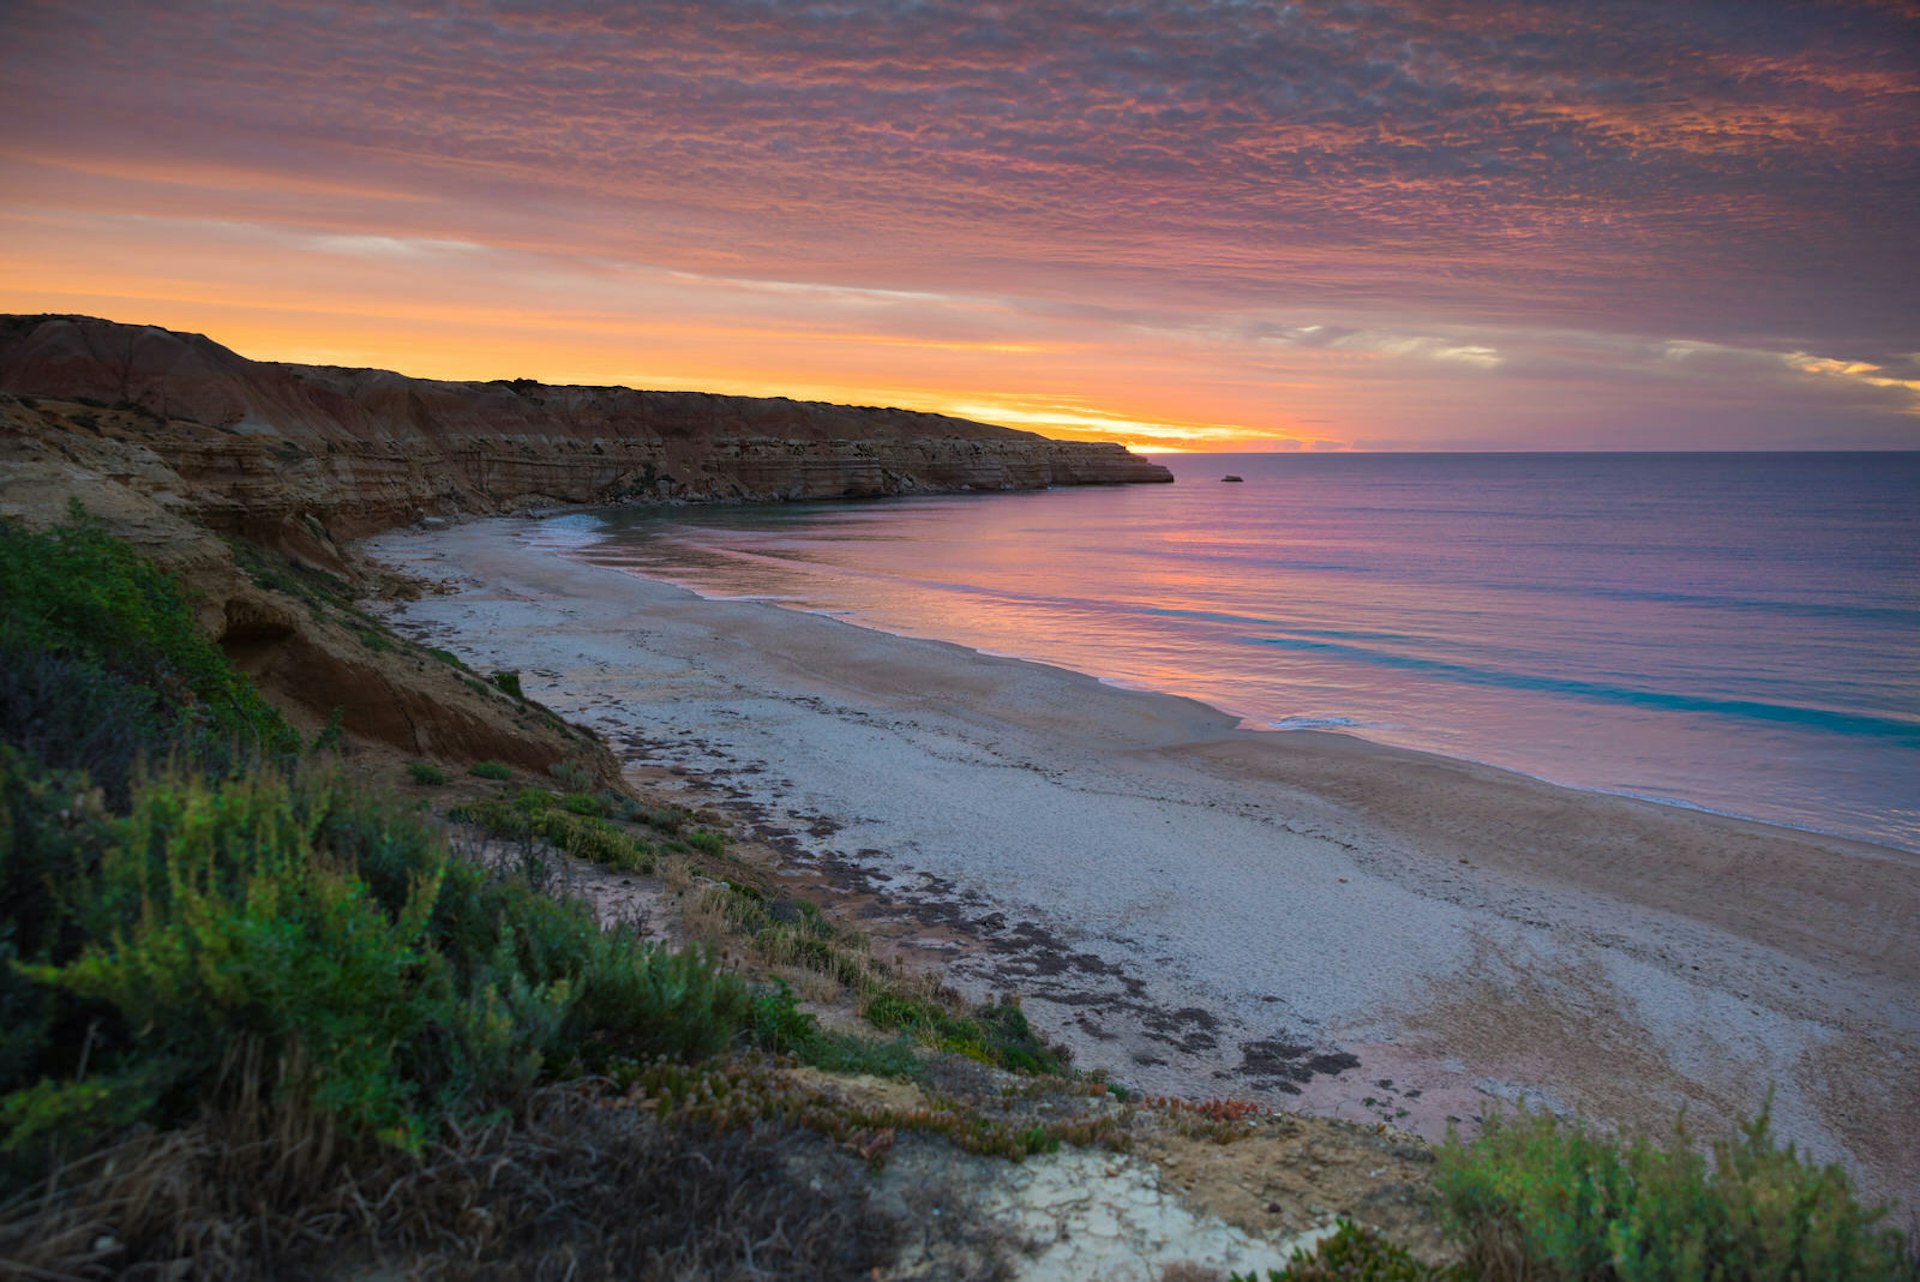 Nudists love the quiet southern stretch of Maslin Beach, one of Australia's best nude beaches